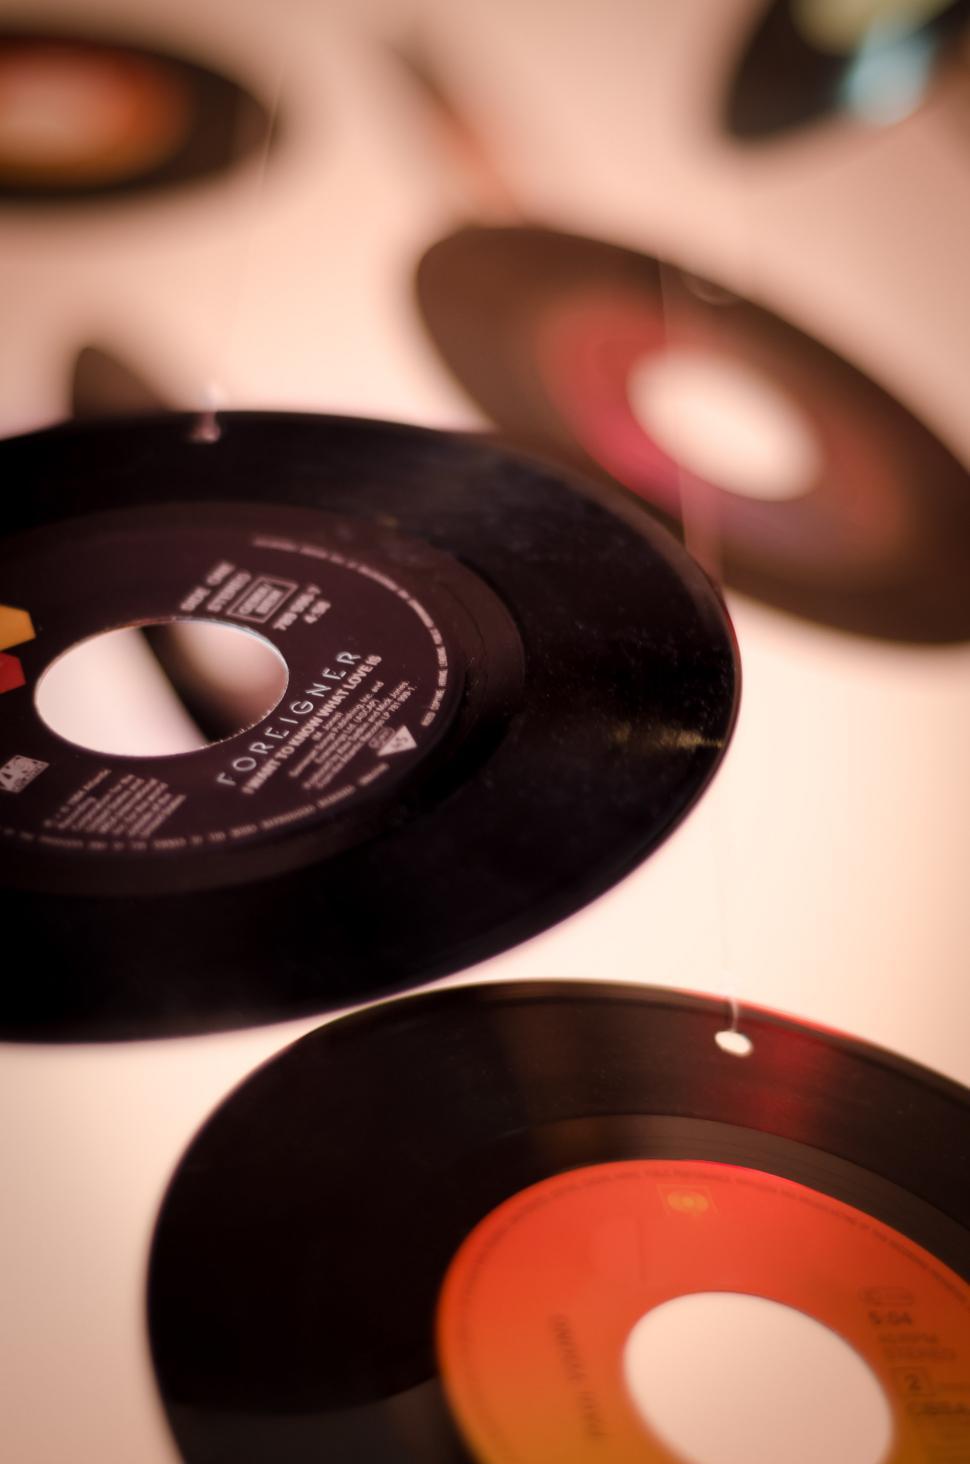 Free Image of Table Topped With Black and Orange Records 